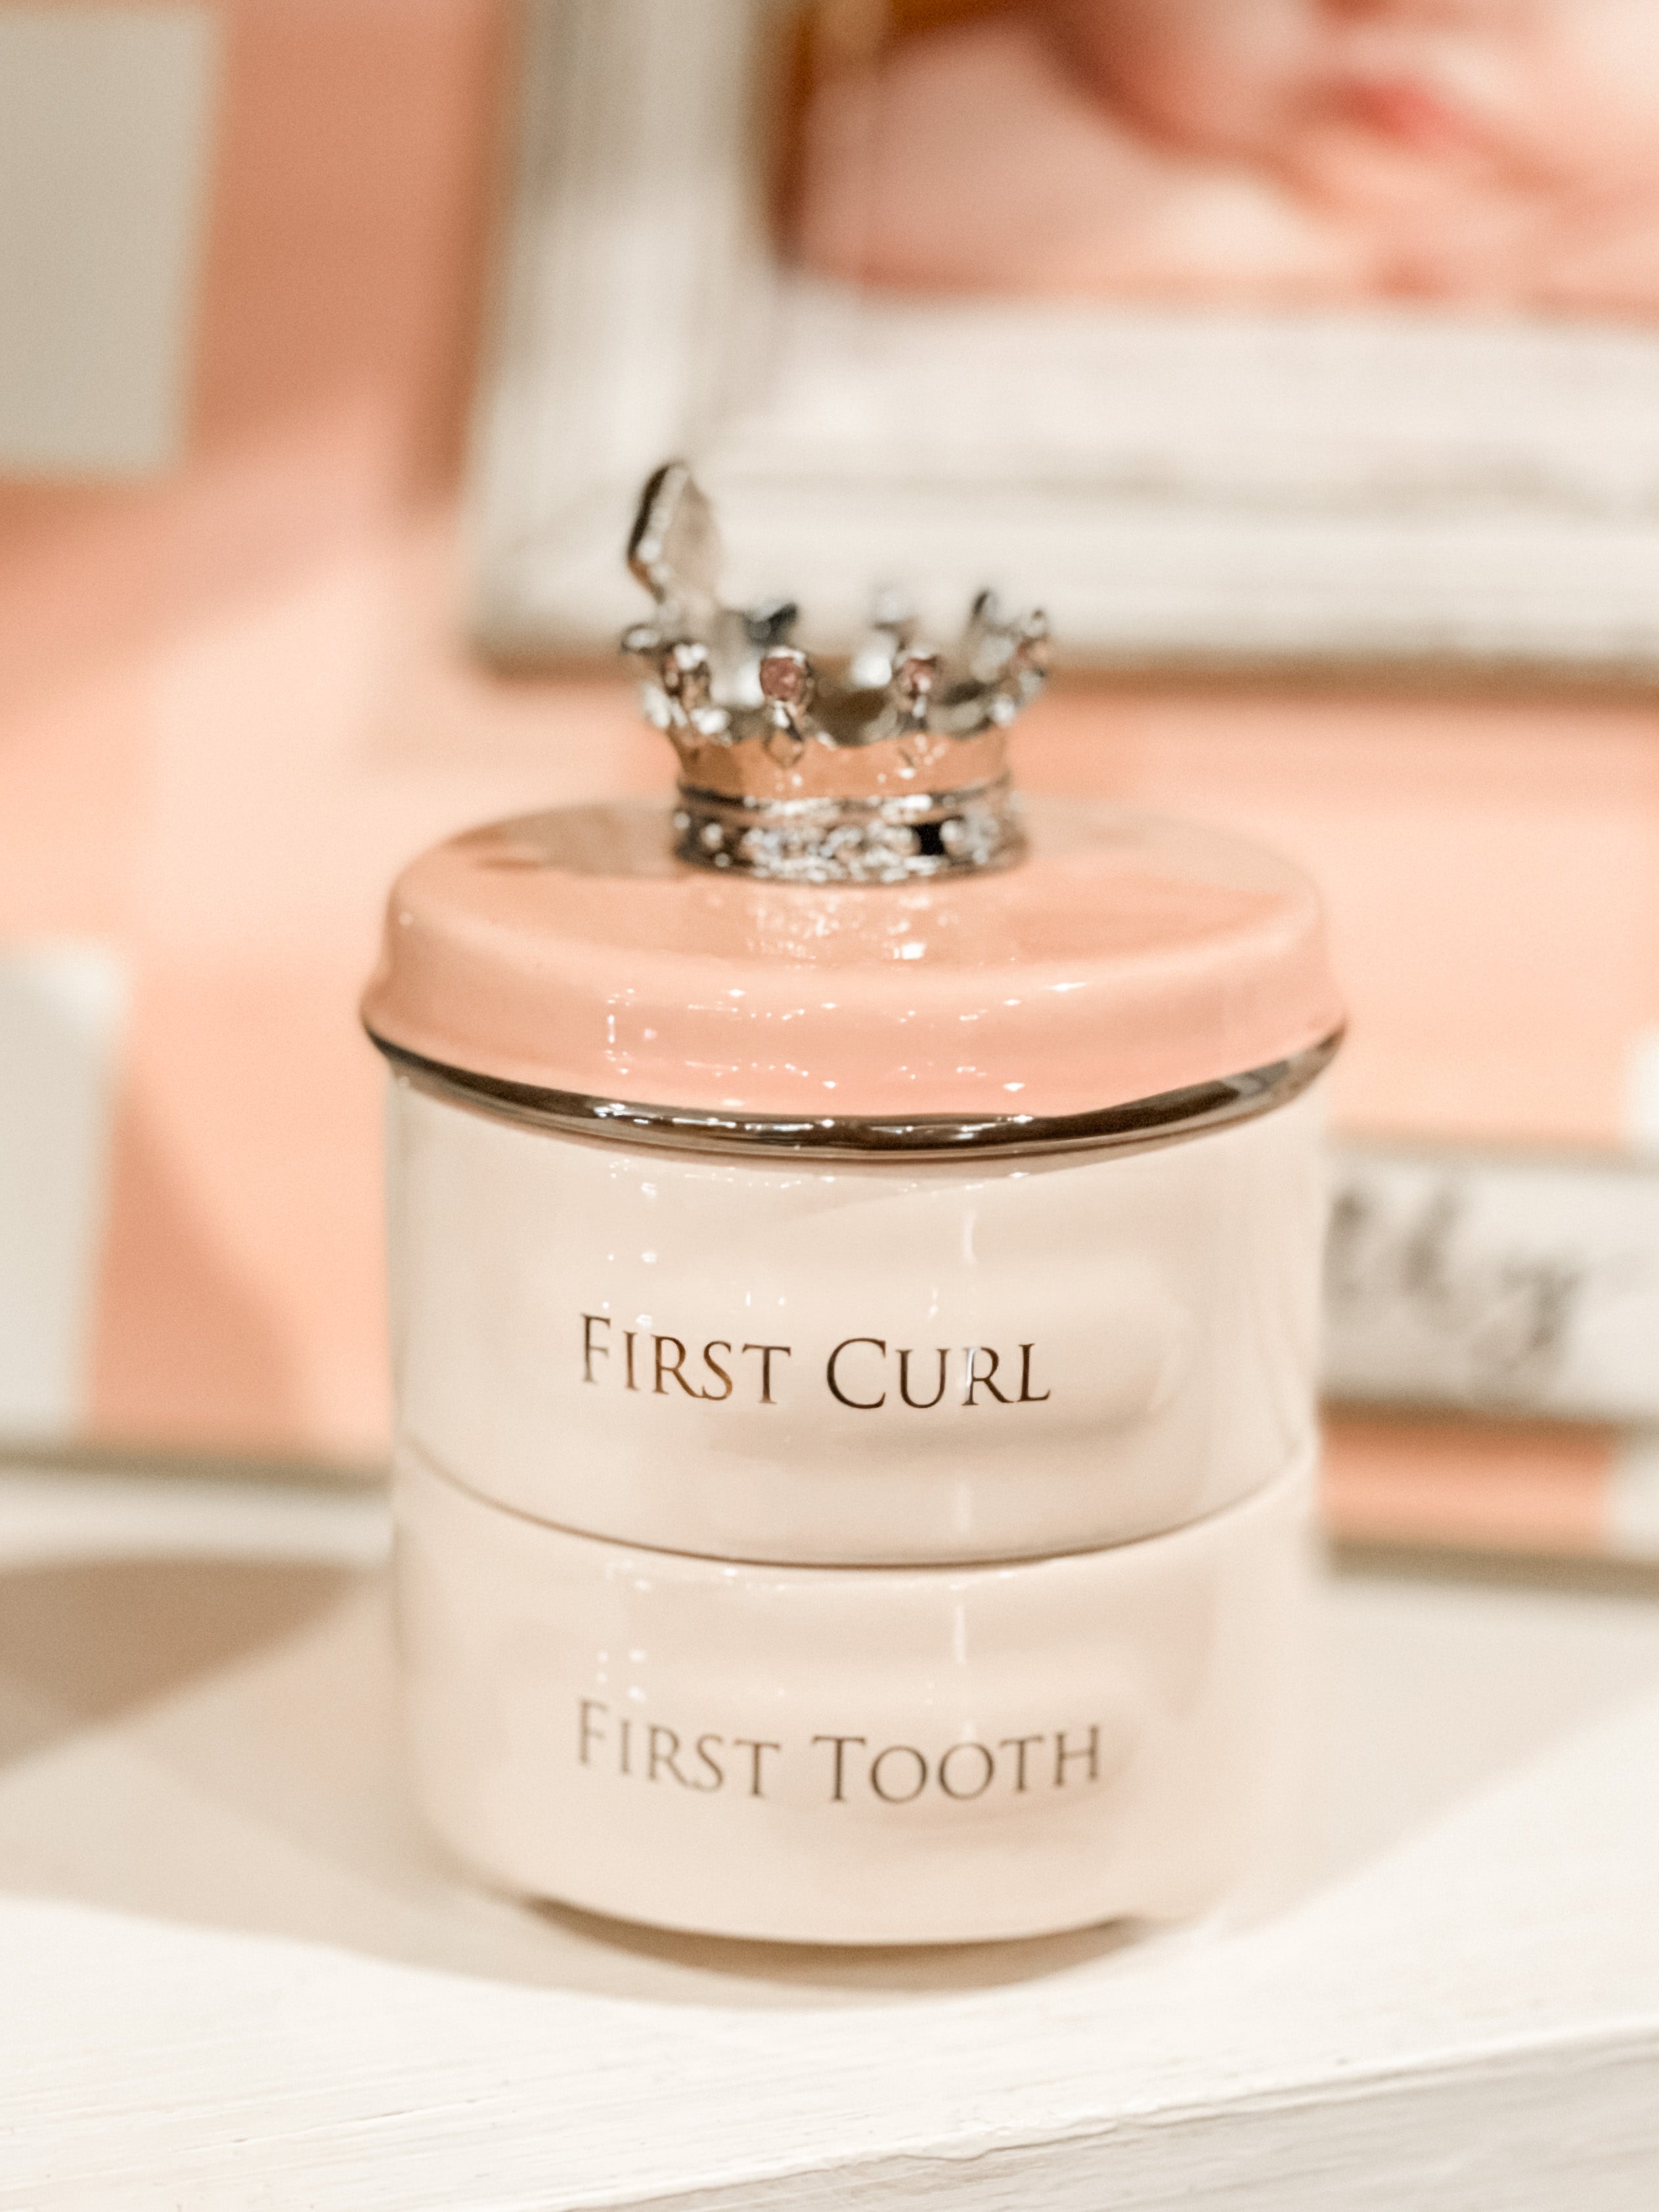 Tooth and Curl Keepsake